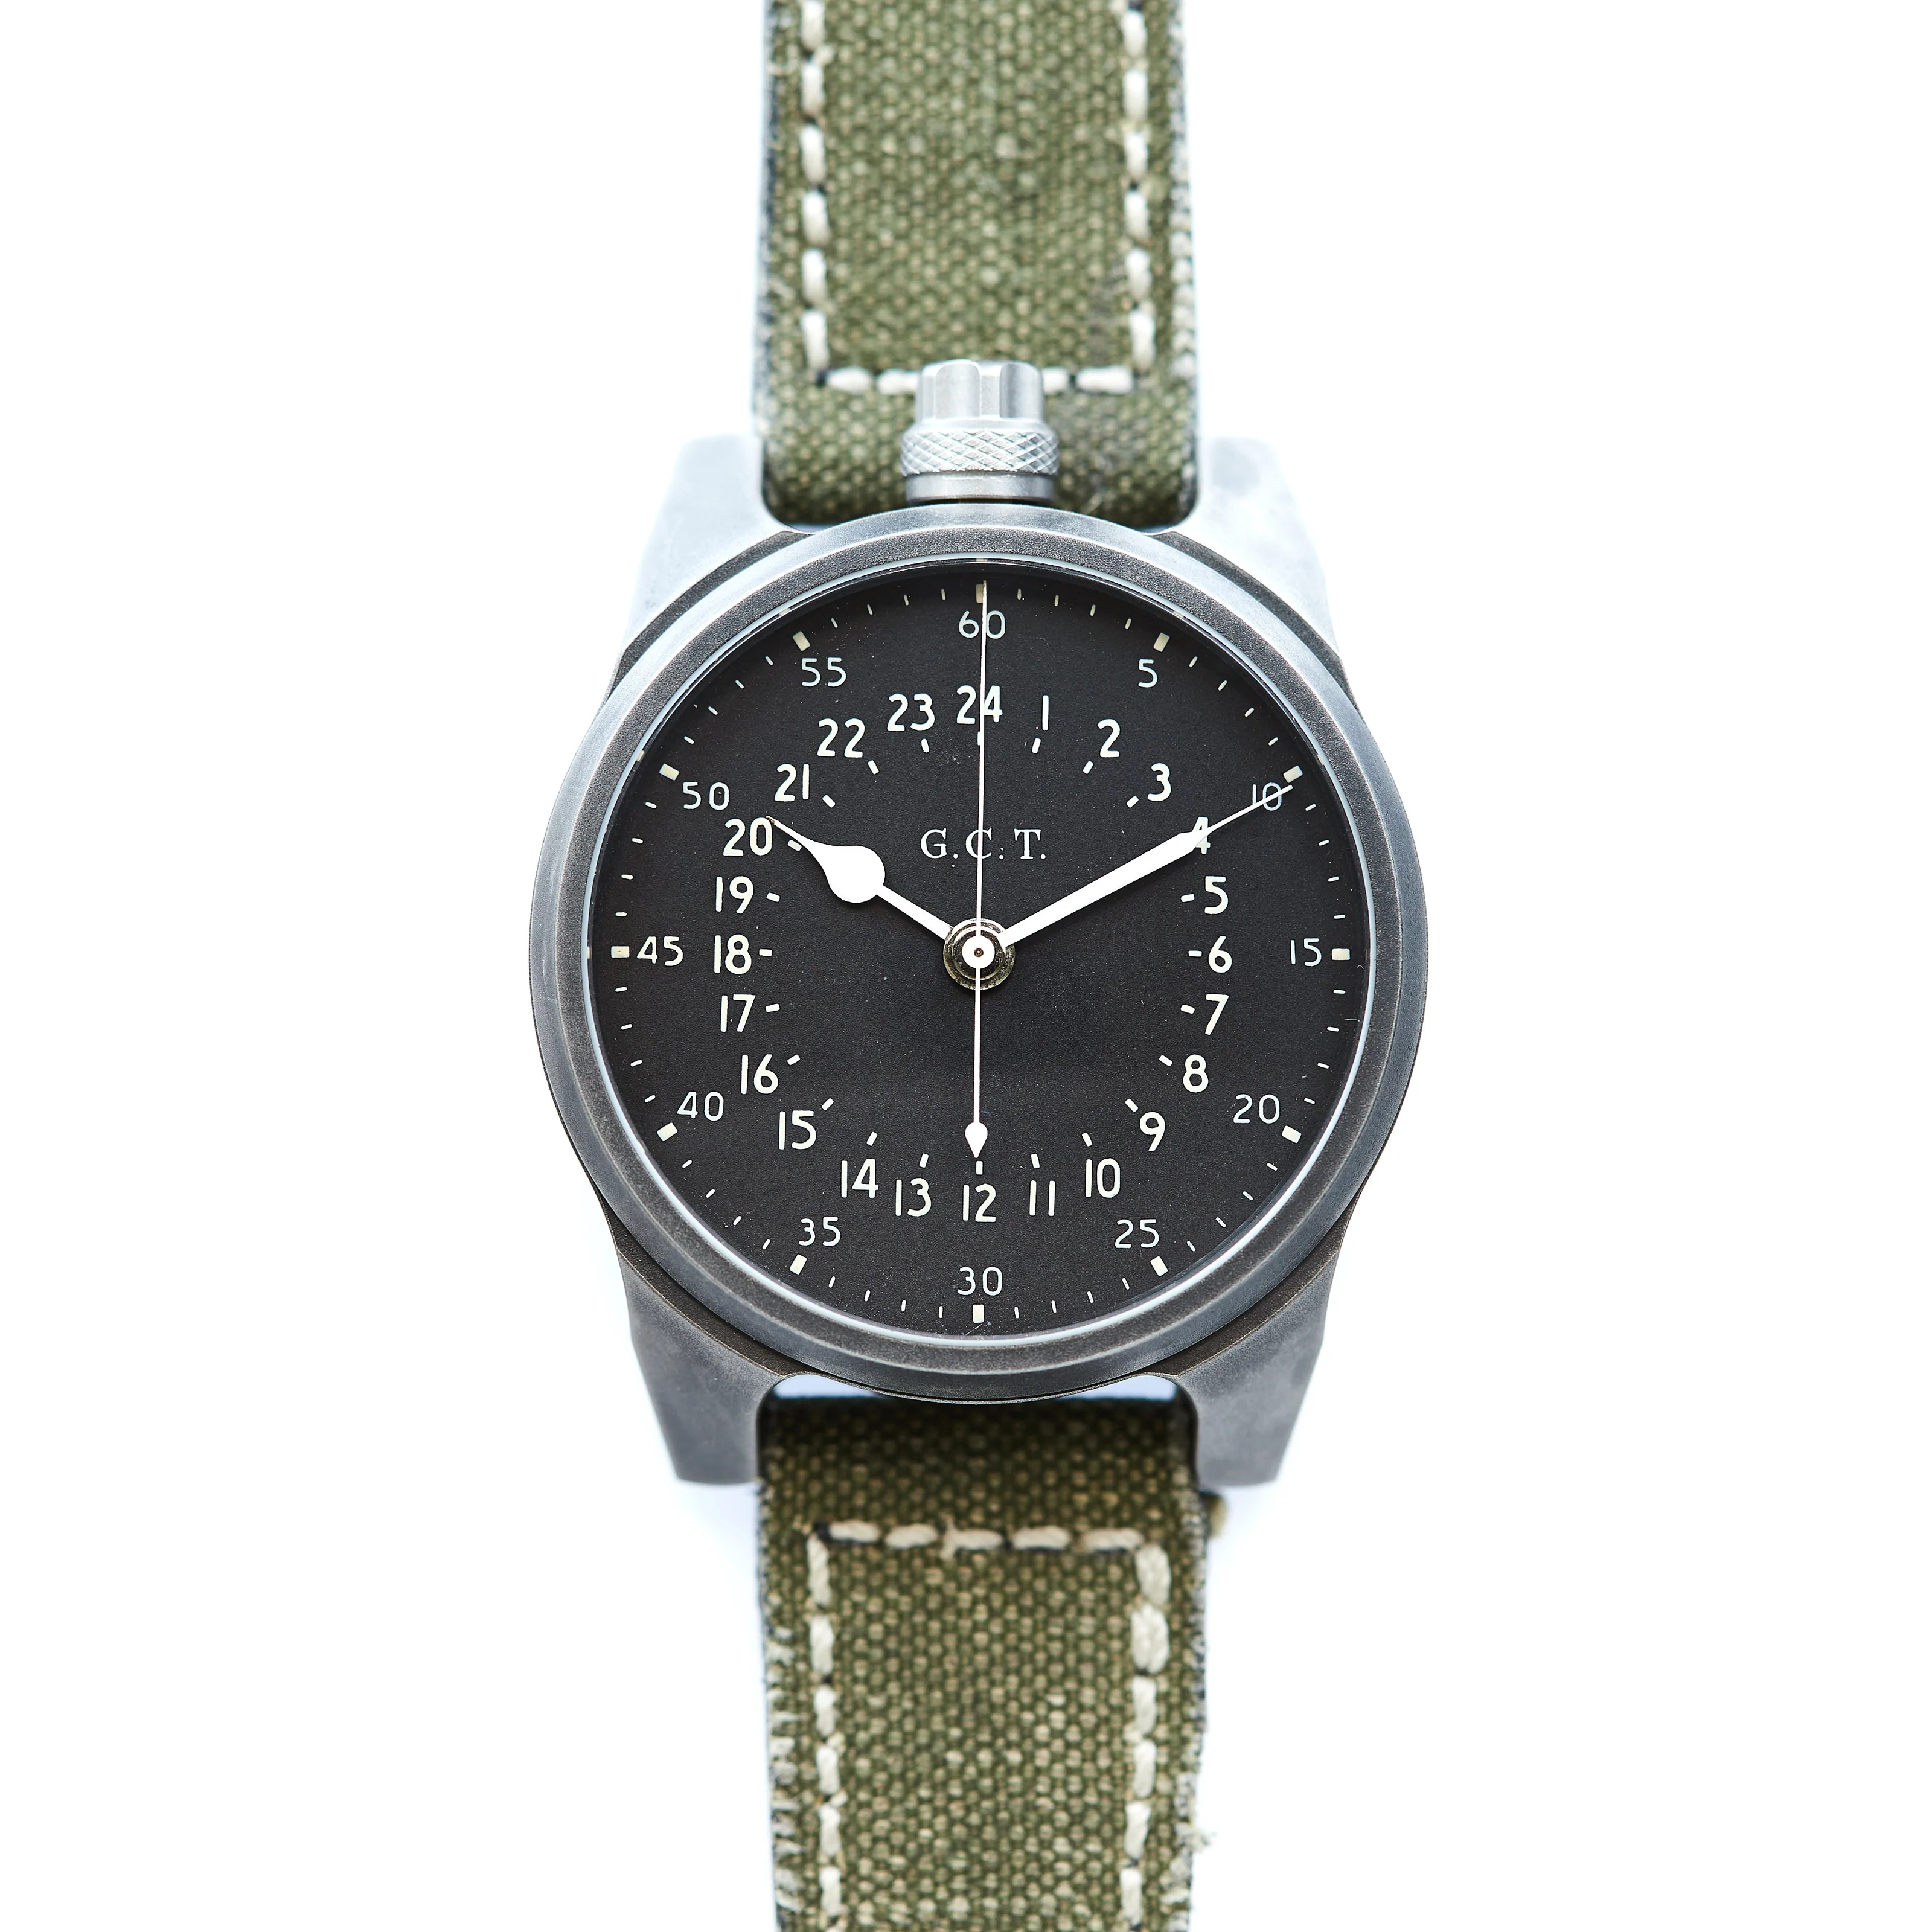 Vortic Watches the Military Edition - Fourth Edition